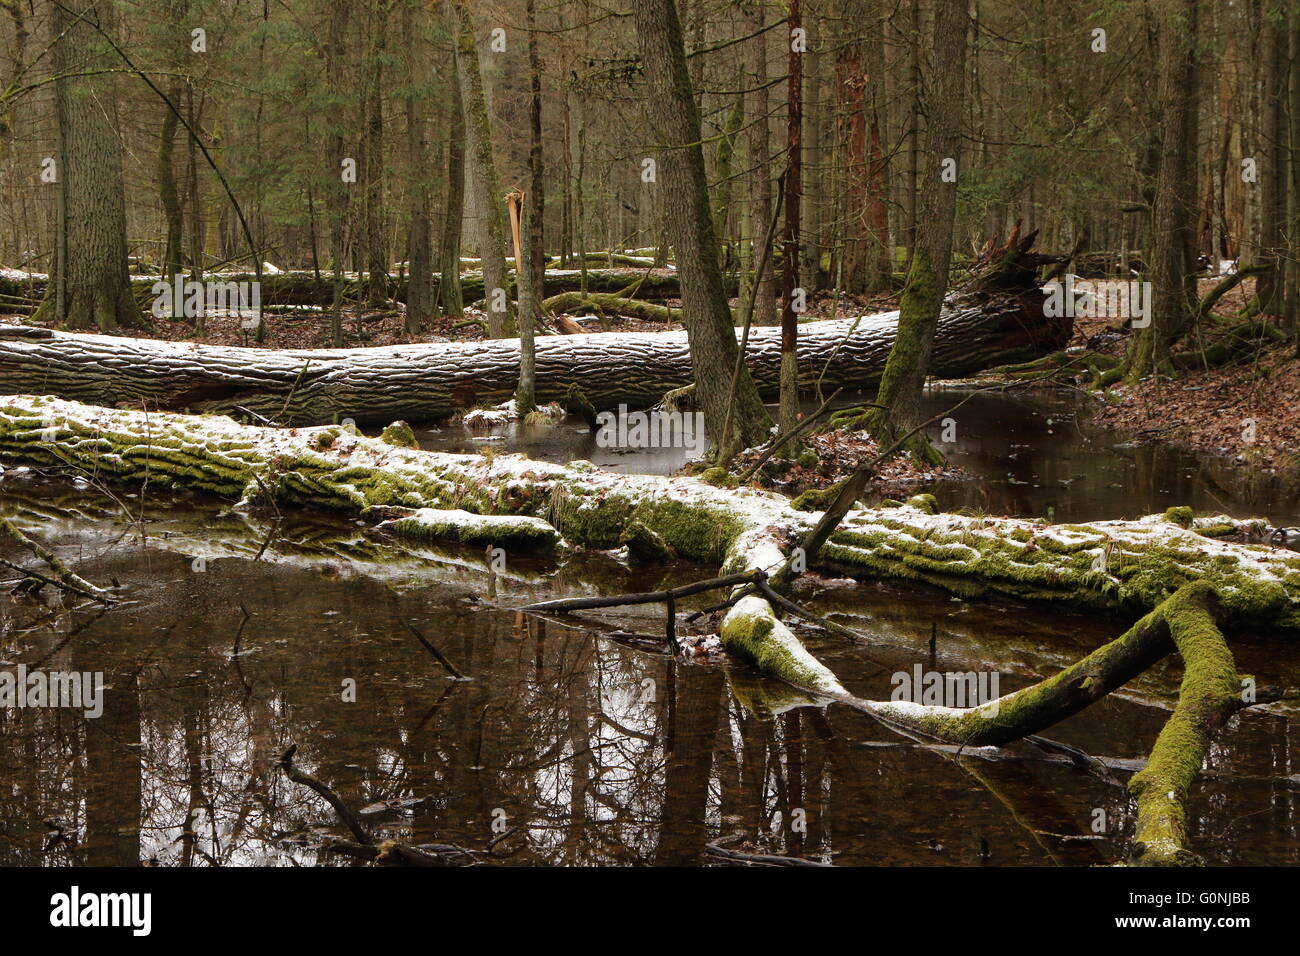 Spring landscape of old forest and broken trees lying in melting snow and water,Bialowieza Forest,Poland,Europe Stock Photo